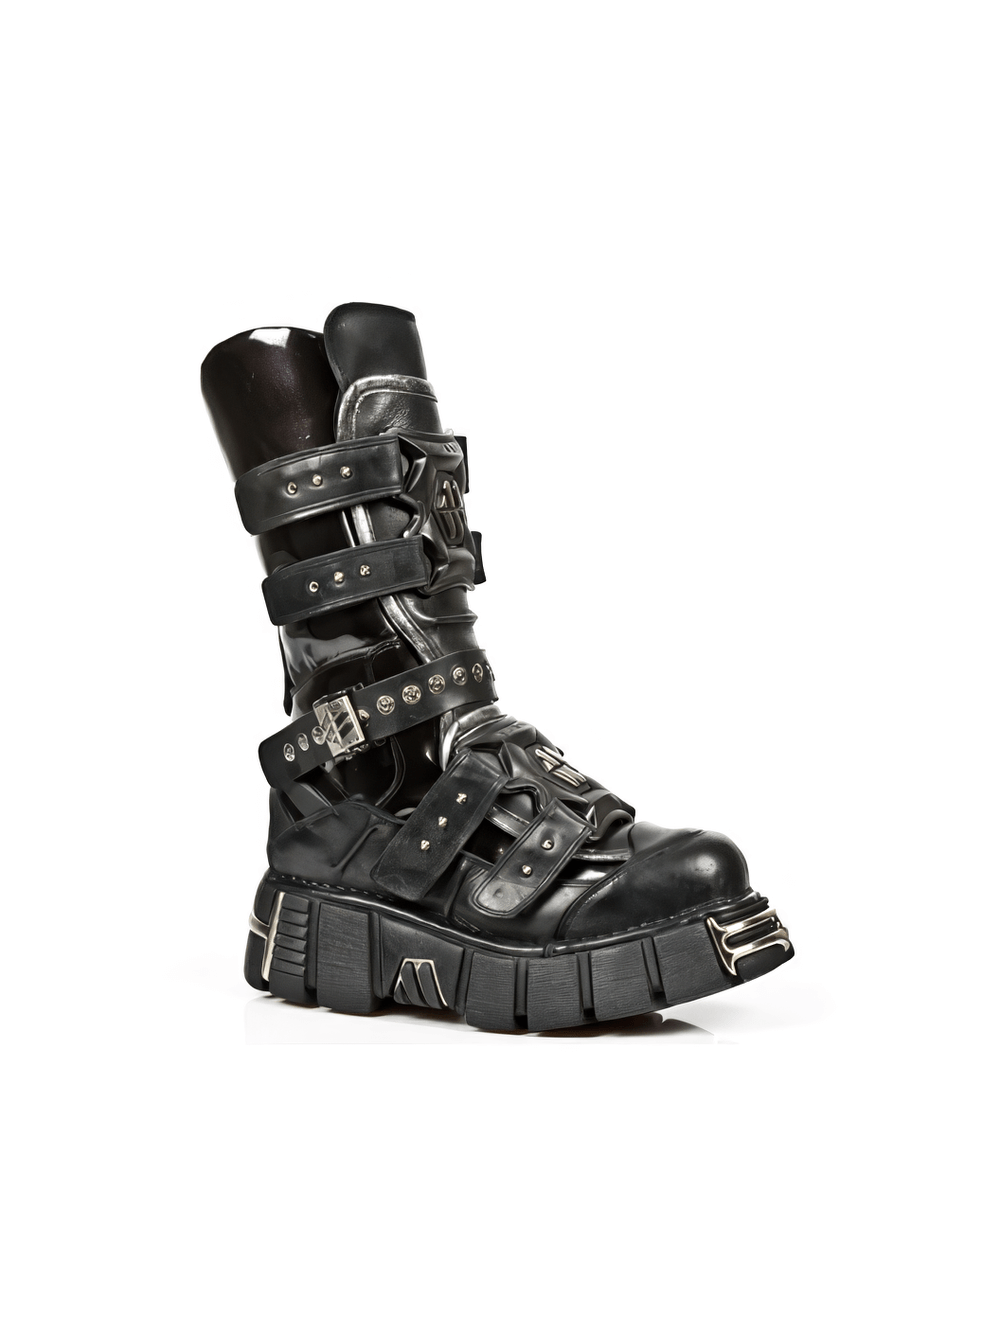 NEW ROCK Steel Buckle Boots with Gothic Design